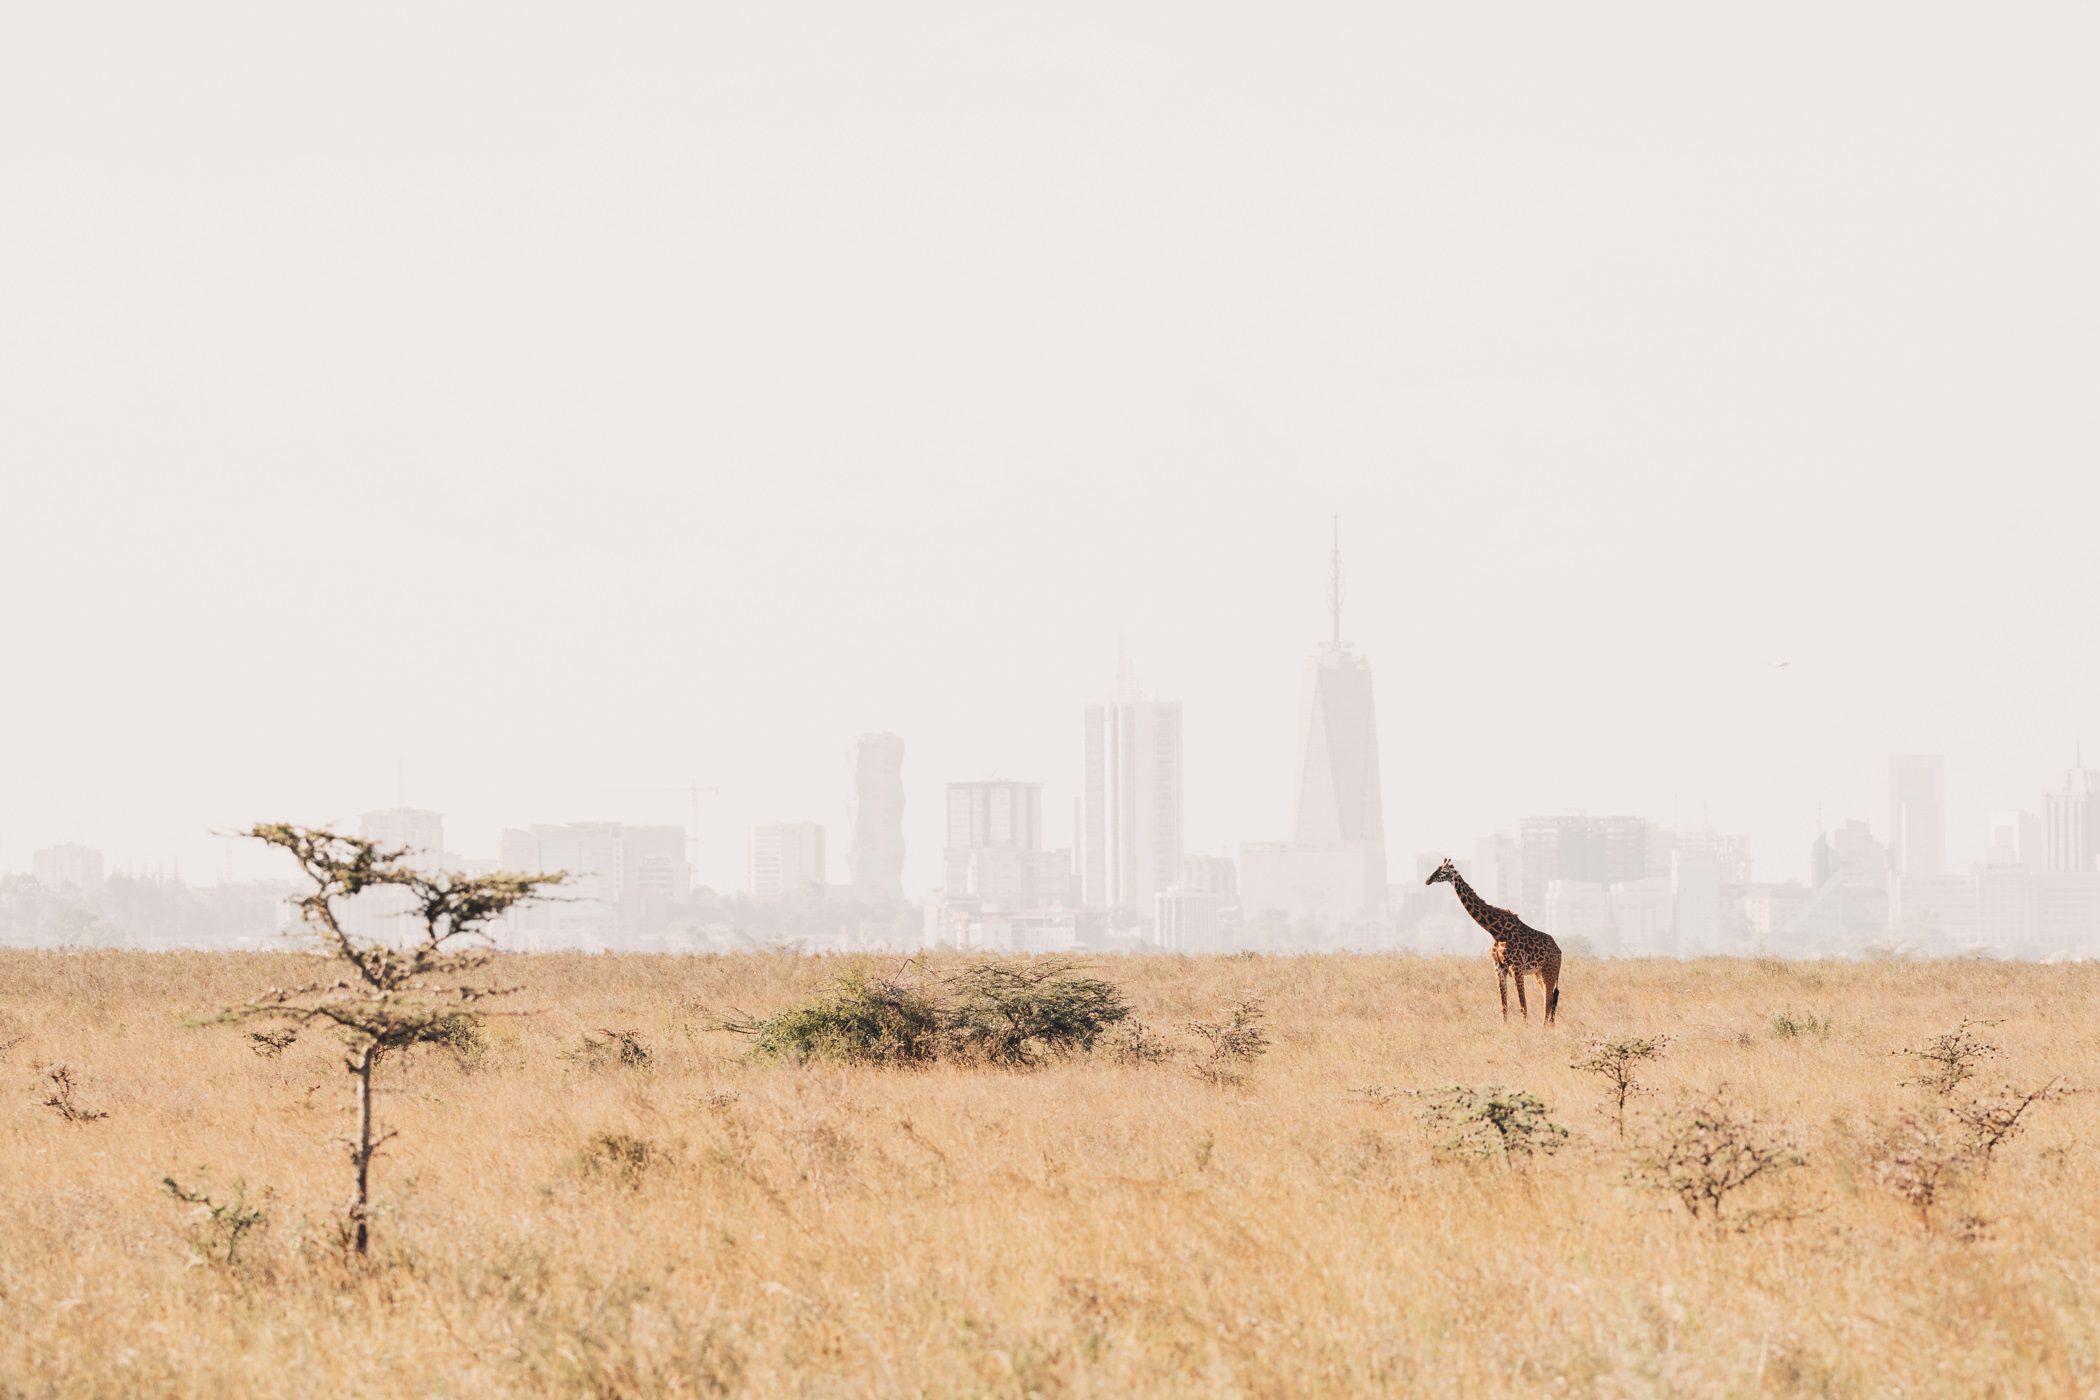 Nairobi National Park - home to Nairobi Tented Camp, the only camp inside the national Park in Kenya's capitol